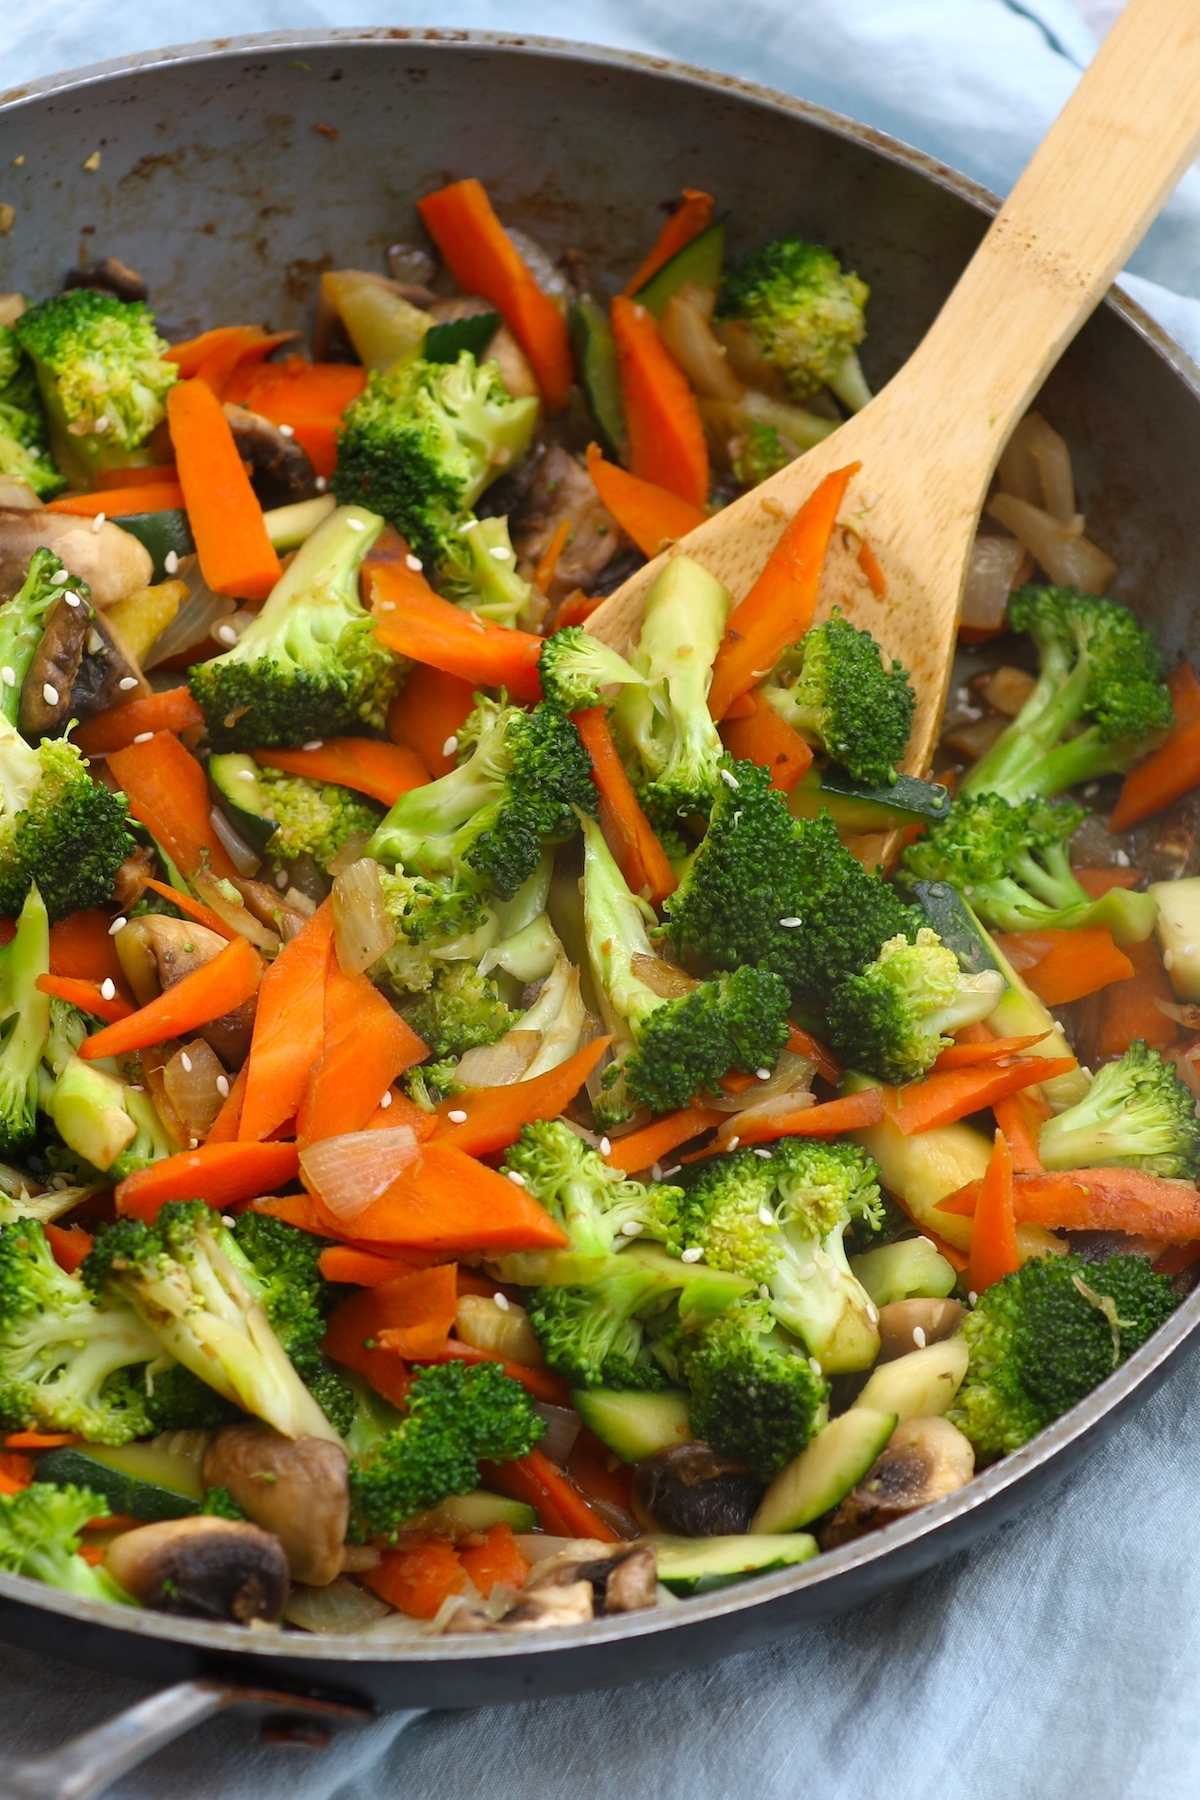 Hibachi Vegetables are loaded with delicious broccoli, carrots, zucchini, and mushrooms. This recipe takes less than 15 minutes to make and is unbelievably flavorful.